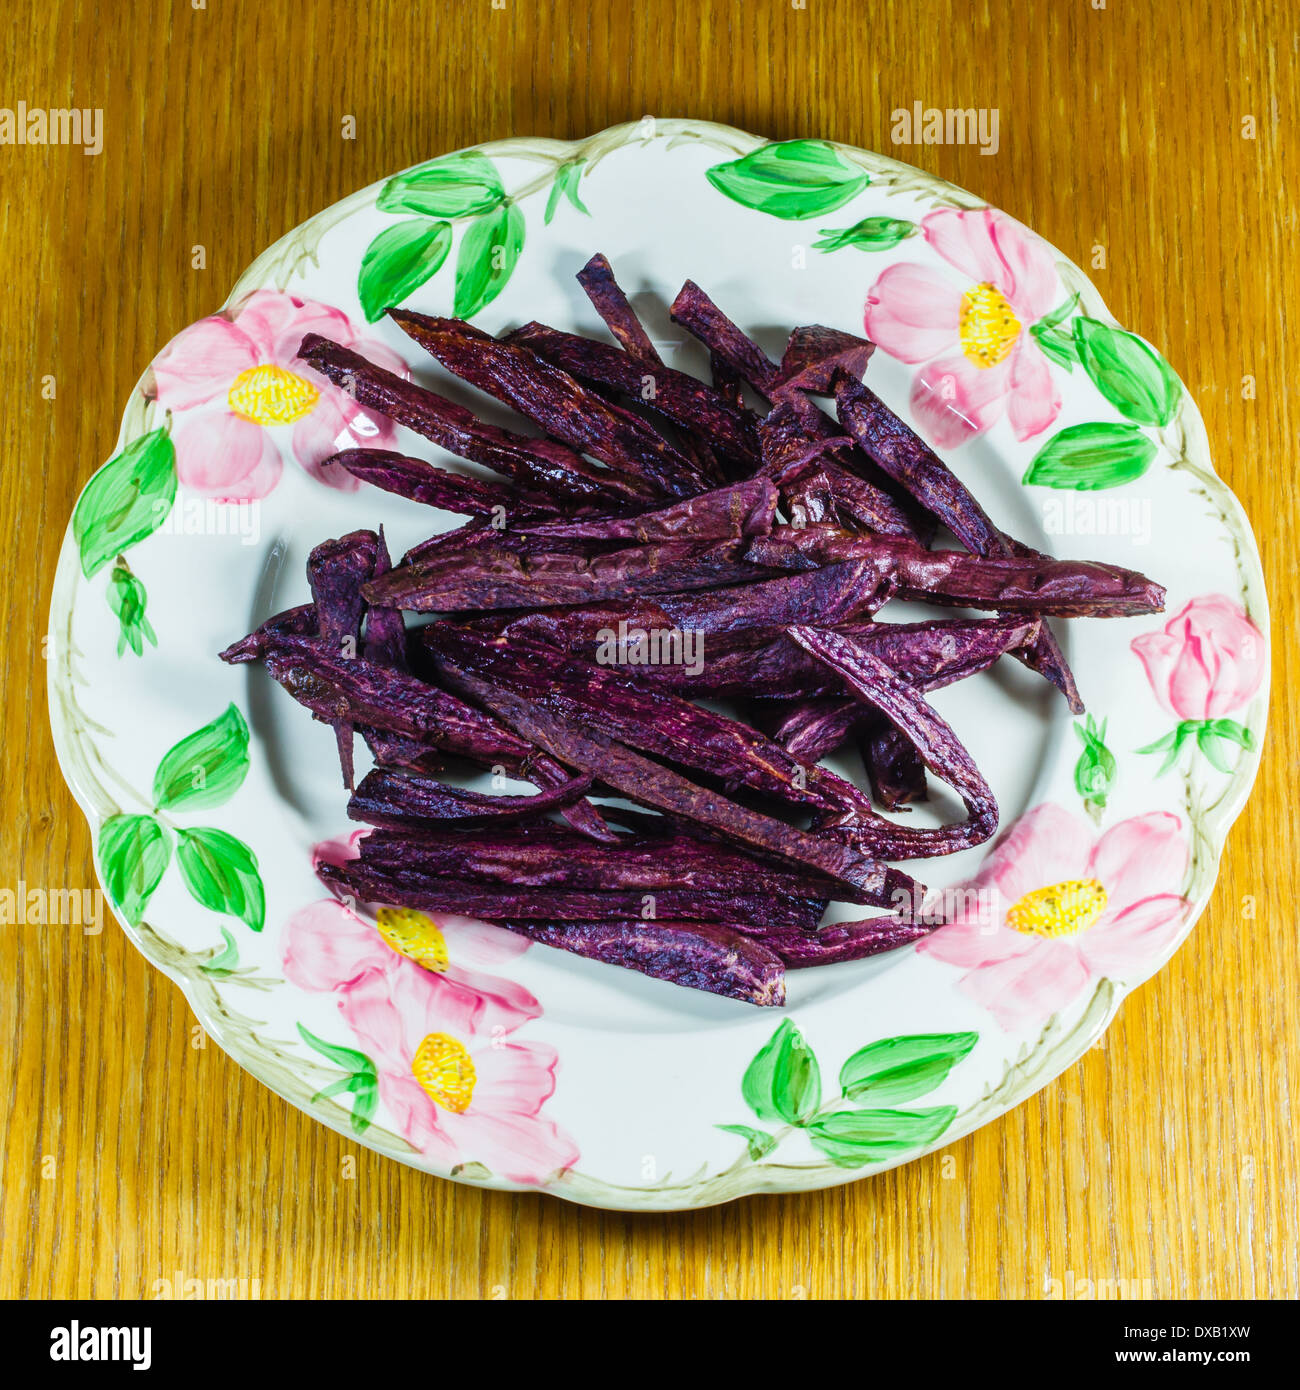 A decorative plate with a heap of purple sweet potato fries ready to be eaten Stock Photo